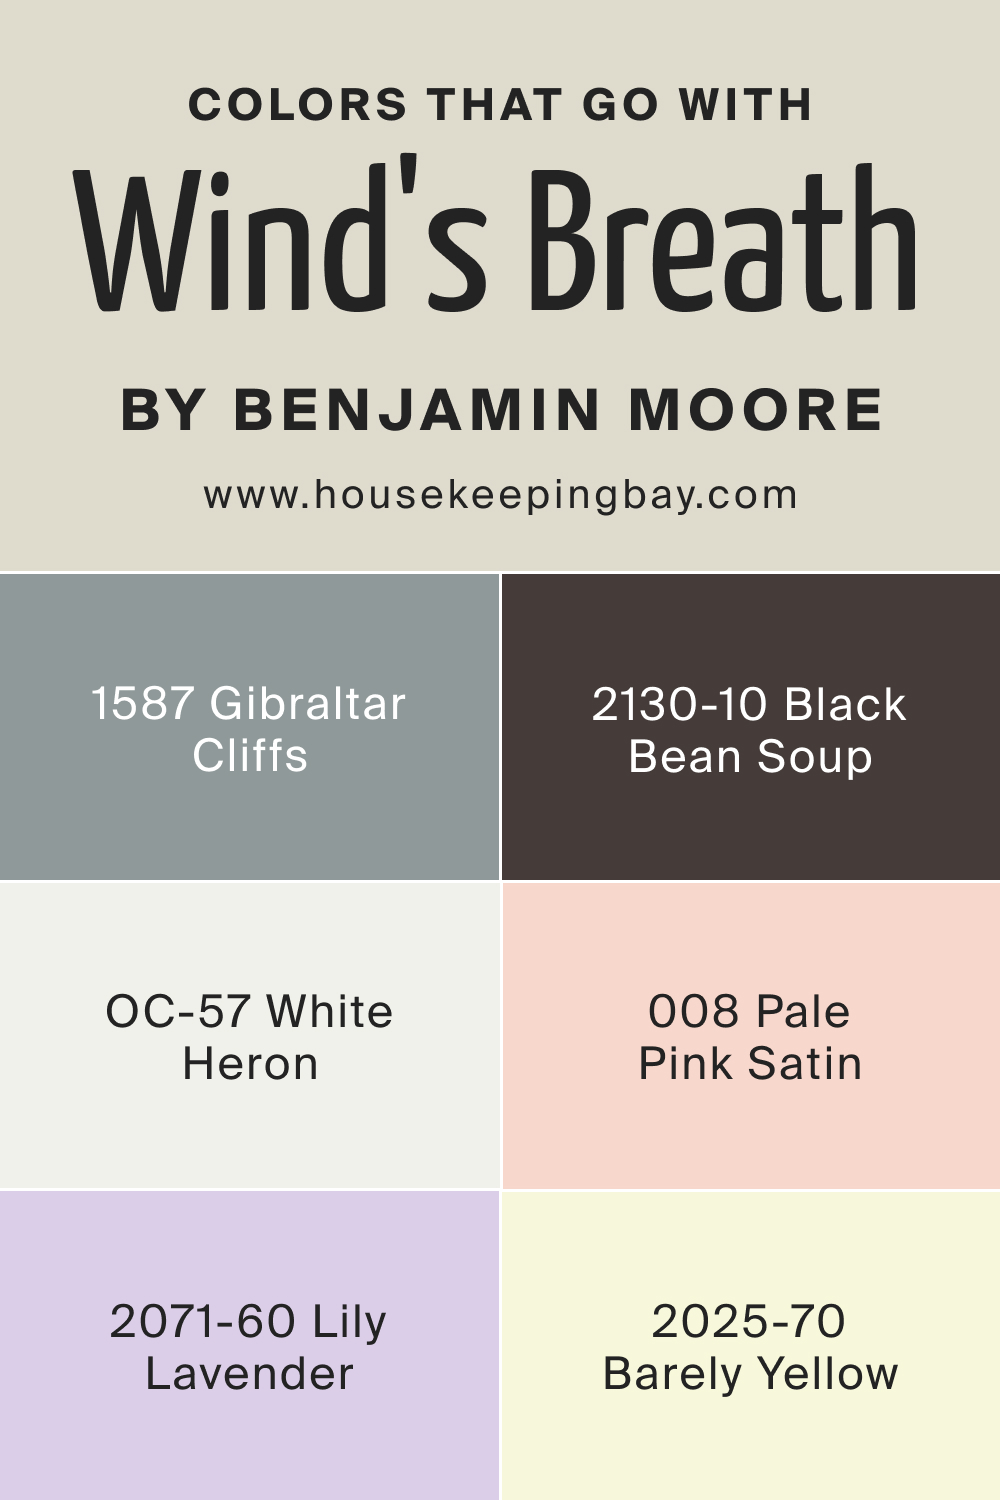 Colors That Go With BM Wind's Breath 981